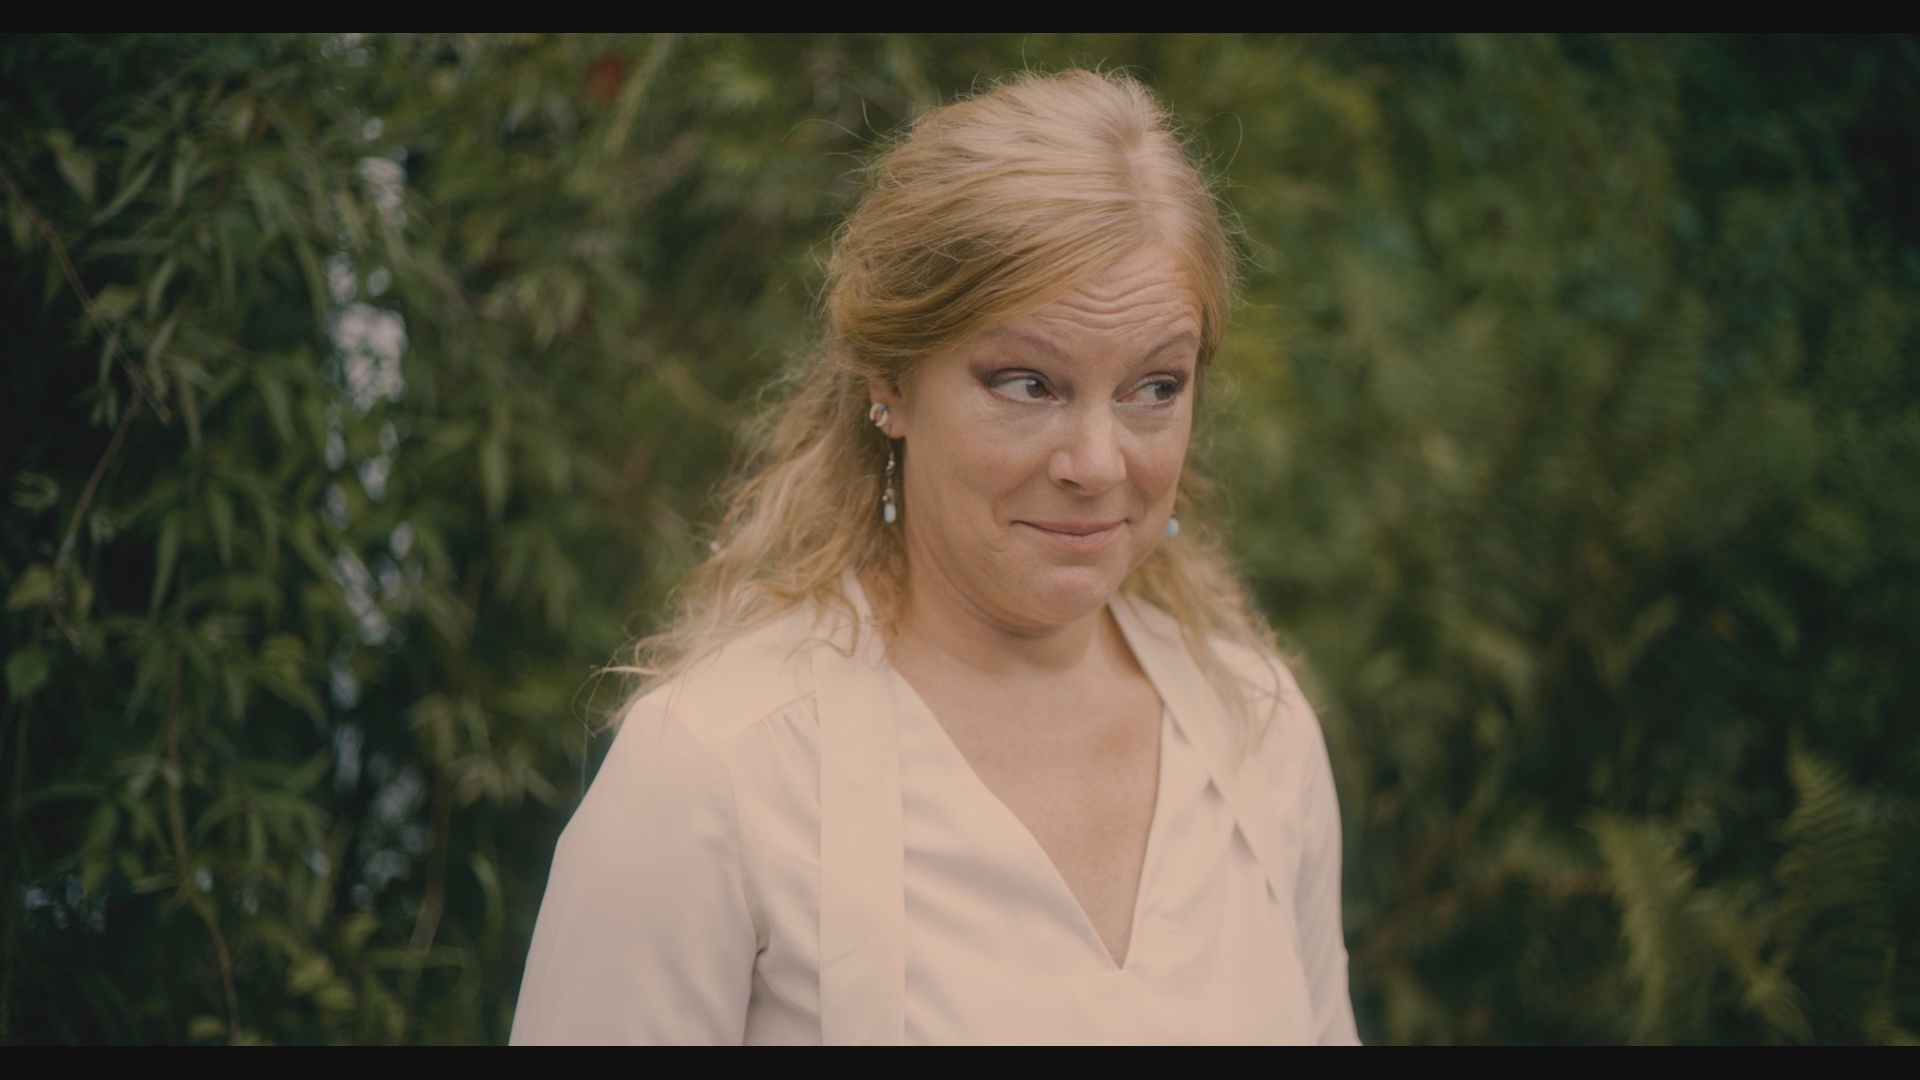 'Inherit the Witch', directed by Cradeaux Alexander & produced by Rohan Quine - still (175) - Heather Cairns as Fiona